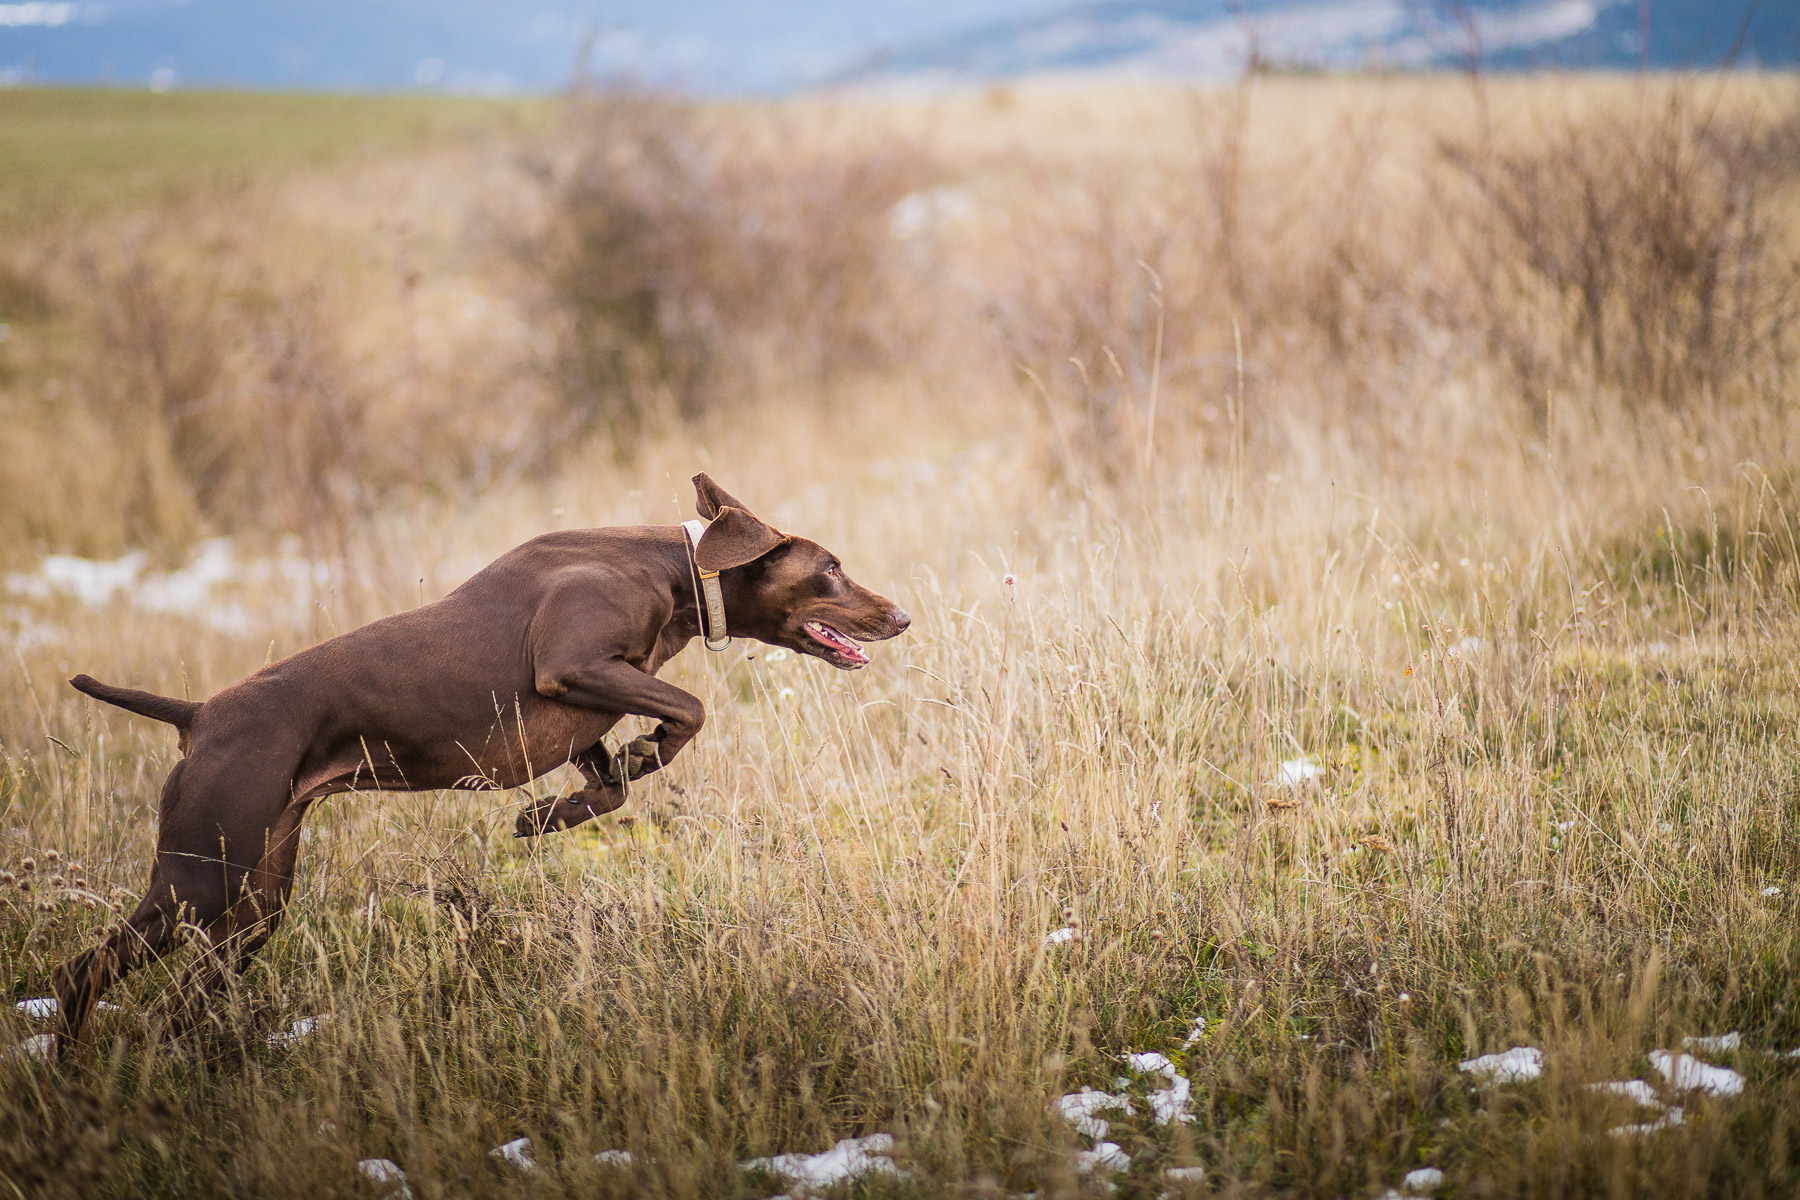 15dog-lifestyle-photographer-hunter-dogs-fetching-pheasants-nature-outdoors-bloodhounts-.jpg